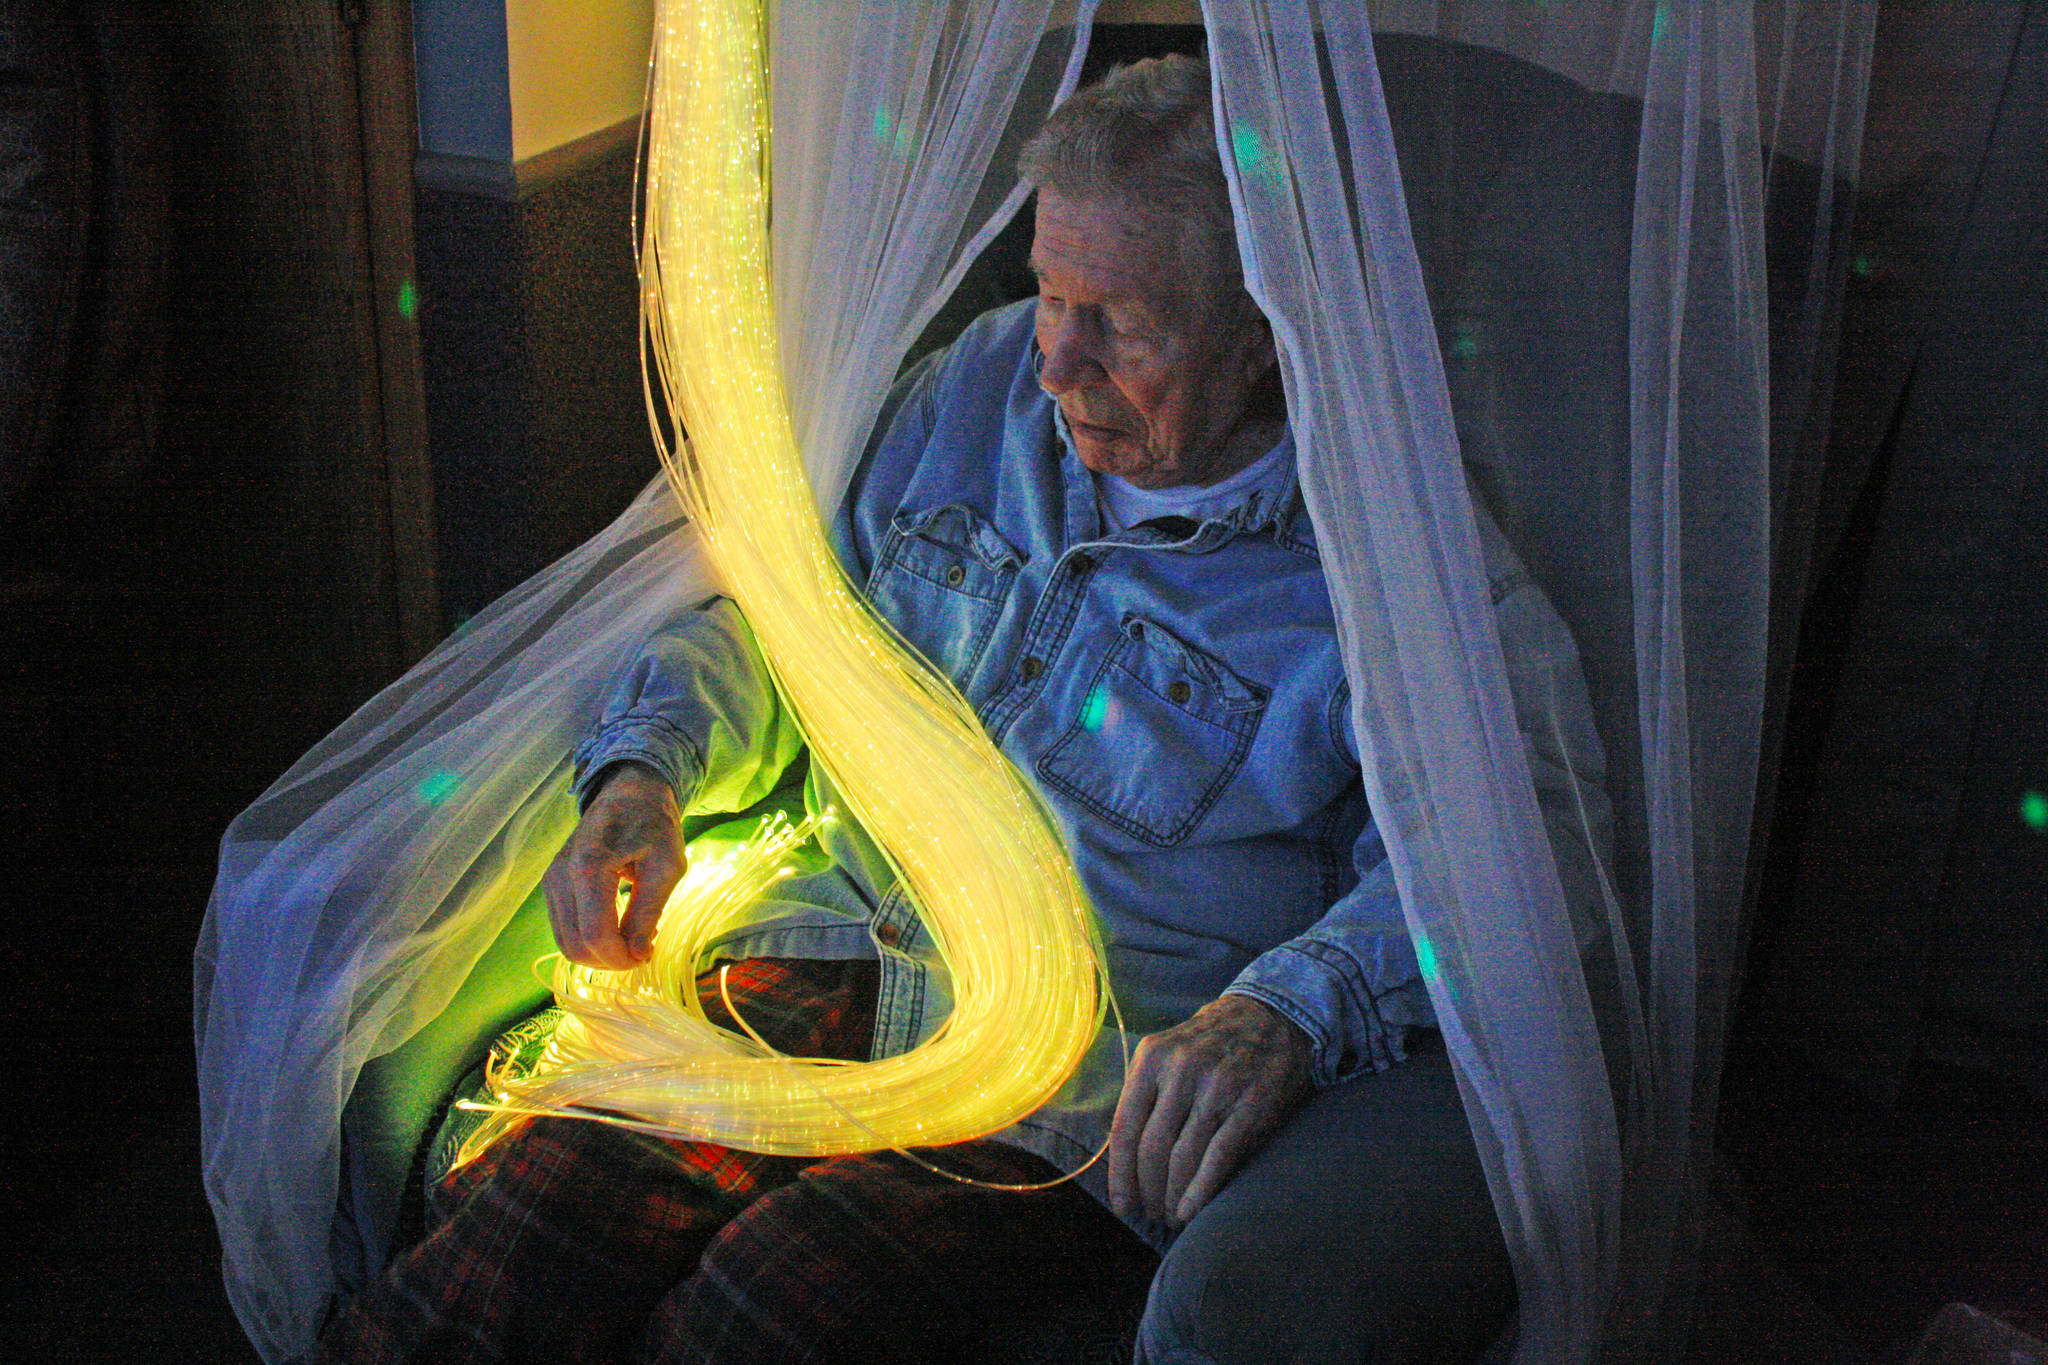 A resident at Heritage Place enjoys colored strands of light during an open house of the home’s Snoezelen room on Friday, March 23 in Soldotna. (Photo by Erin Thompson/Peninsula Clarion)